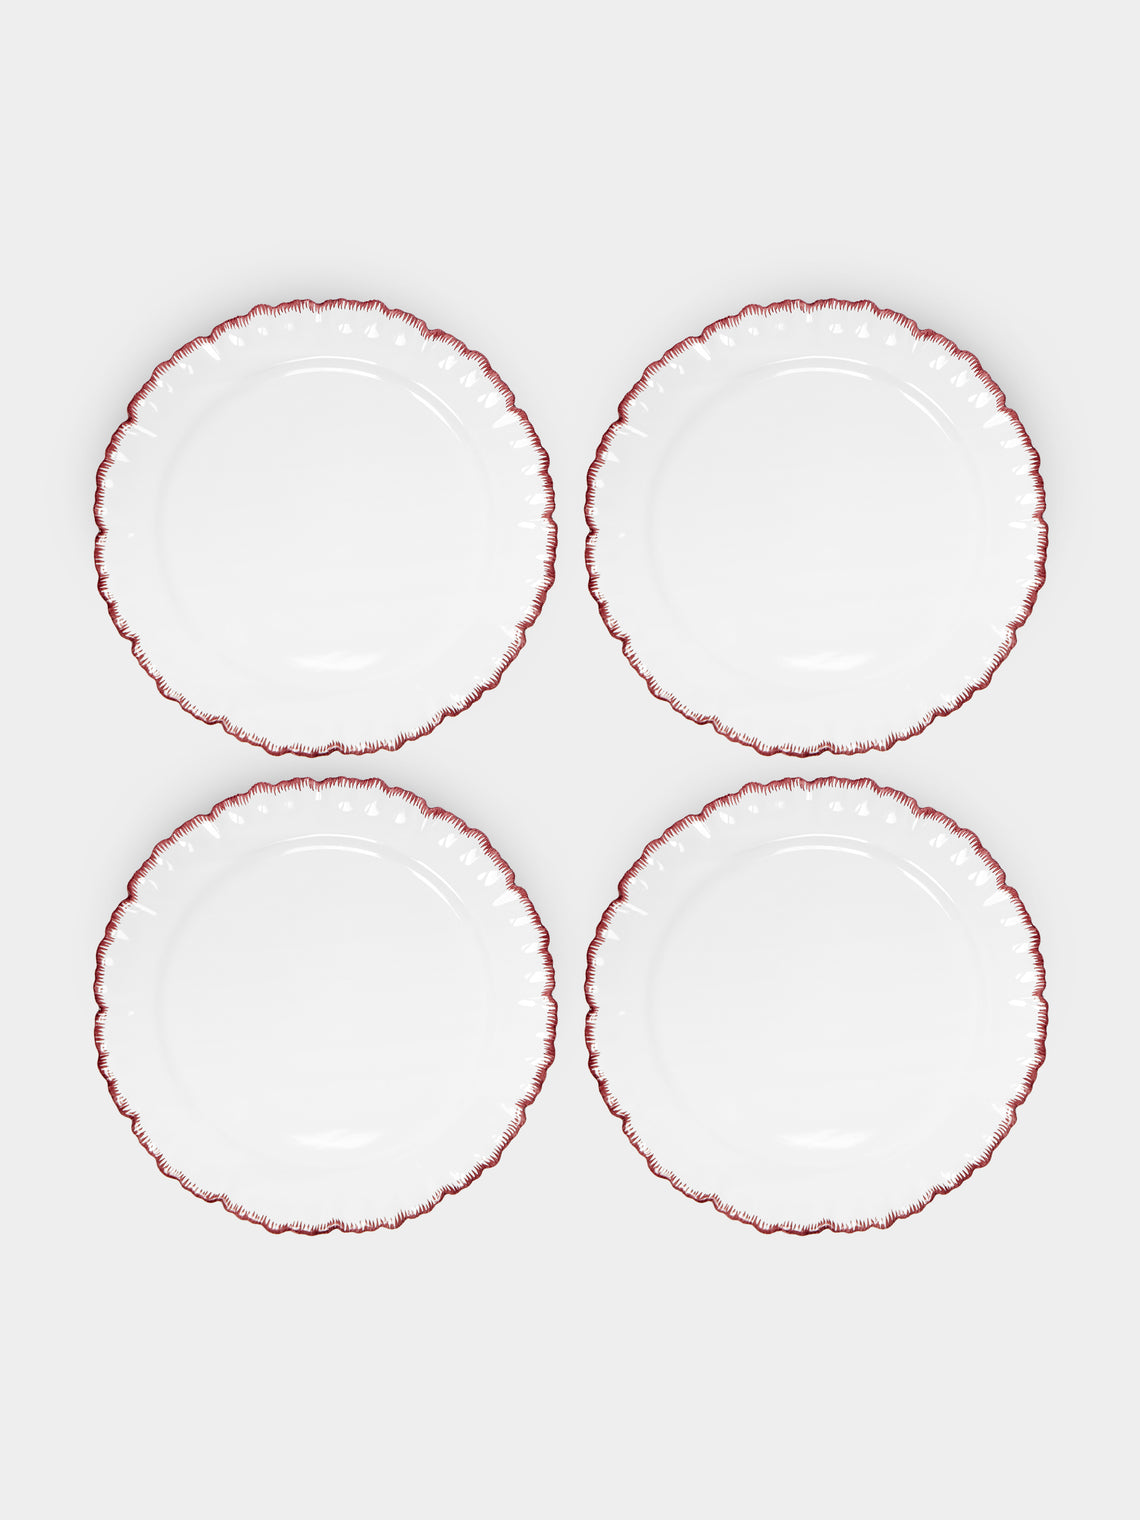 Atelier Soleil - Combed Edge Hand-Painted Ceramic Charger Plates (Set of 4) -  - ABASK